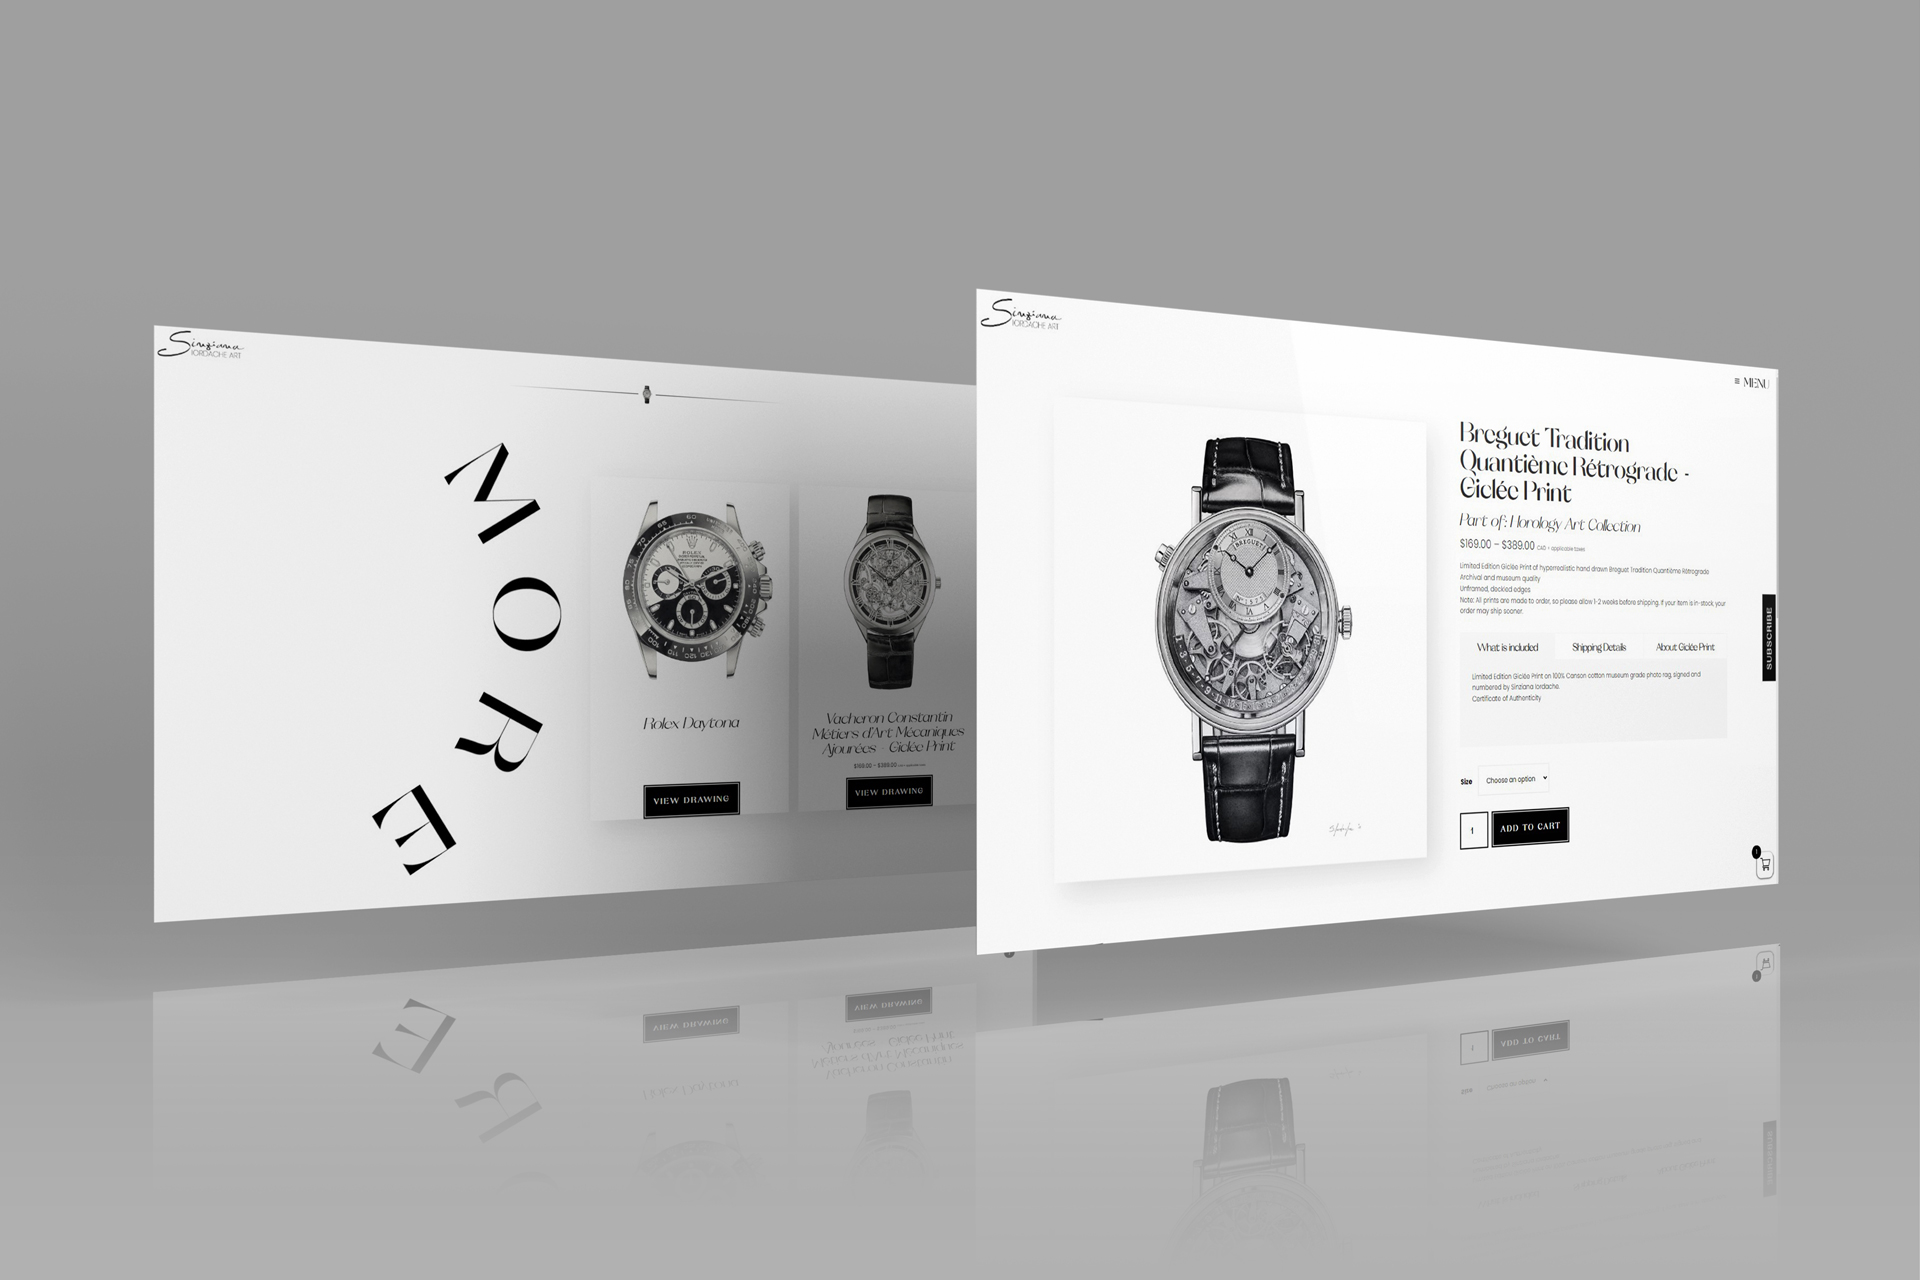 This PixelUp's image highlights the Sinziana Iordache Art Project, focusing on the 'Breguet Tradition Quantième Rétrograde – Art Drawing Giclée Print' products page. It presents an image on the left and titles, descriptions, and prices on the right, set against a minimalistic white background, enhancing clarity and drawing attention to the artwork.